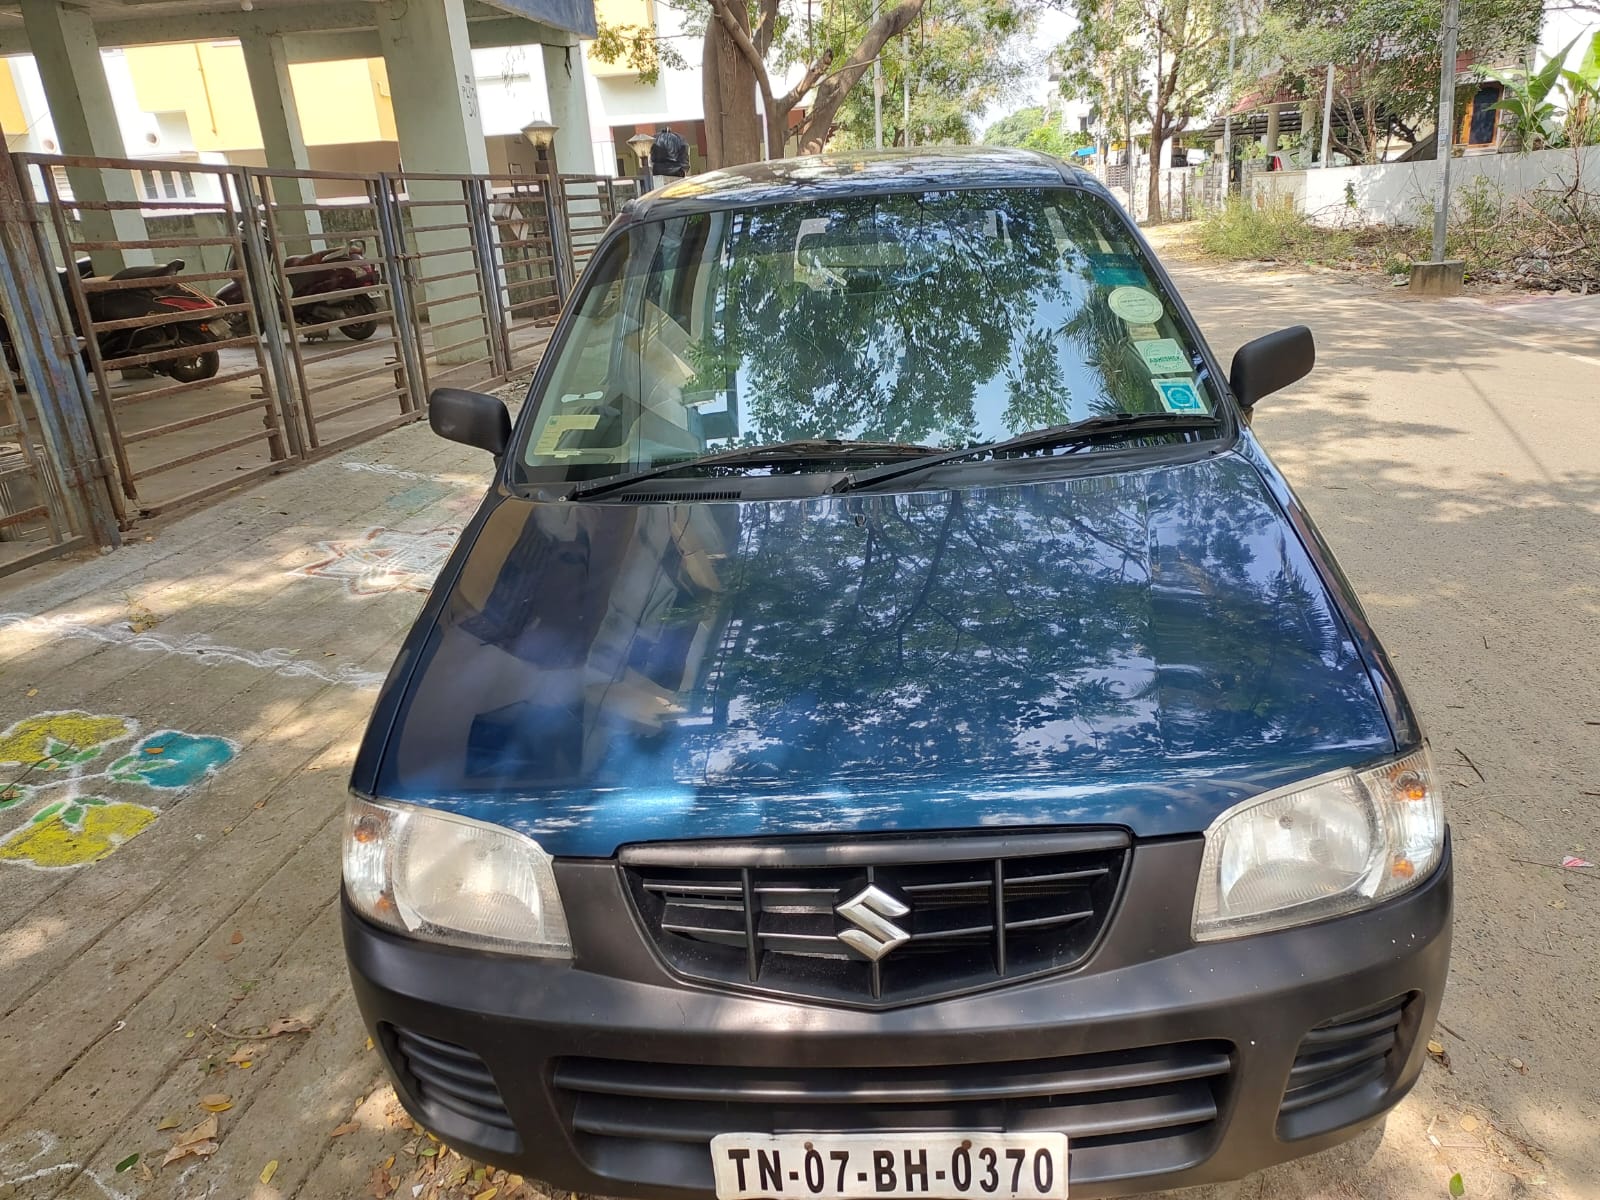 6032-for-sale-Maruthi-Suzuki-Alto-Petrol-Second-Owner-2010-TN-registered-rs-168999